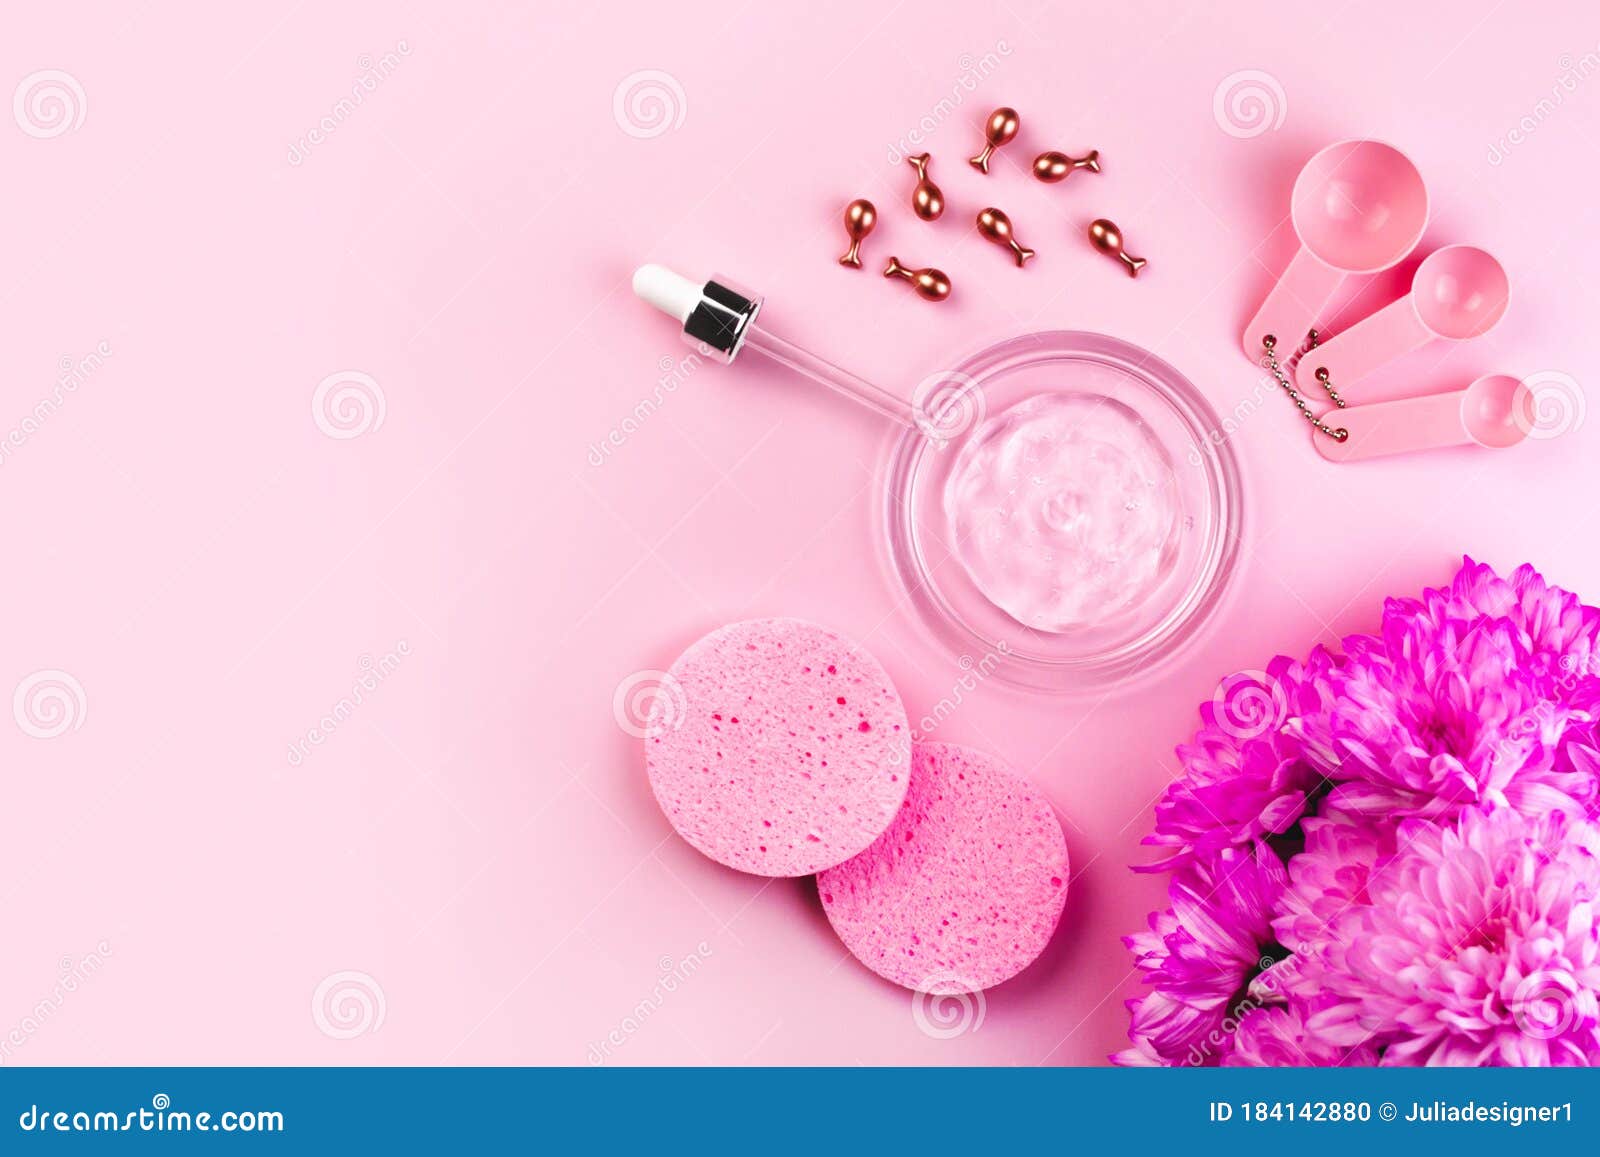 Beauty Salon Wellness Procedures, Mask, Face Care Banner. Design Template,  Pink Flat Lay Background Stock Photo - Image of ampoule, liquid: 184142880